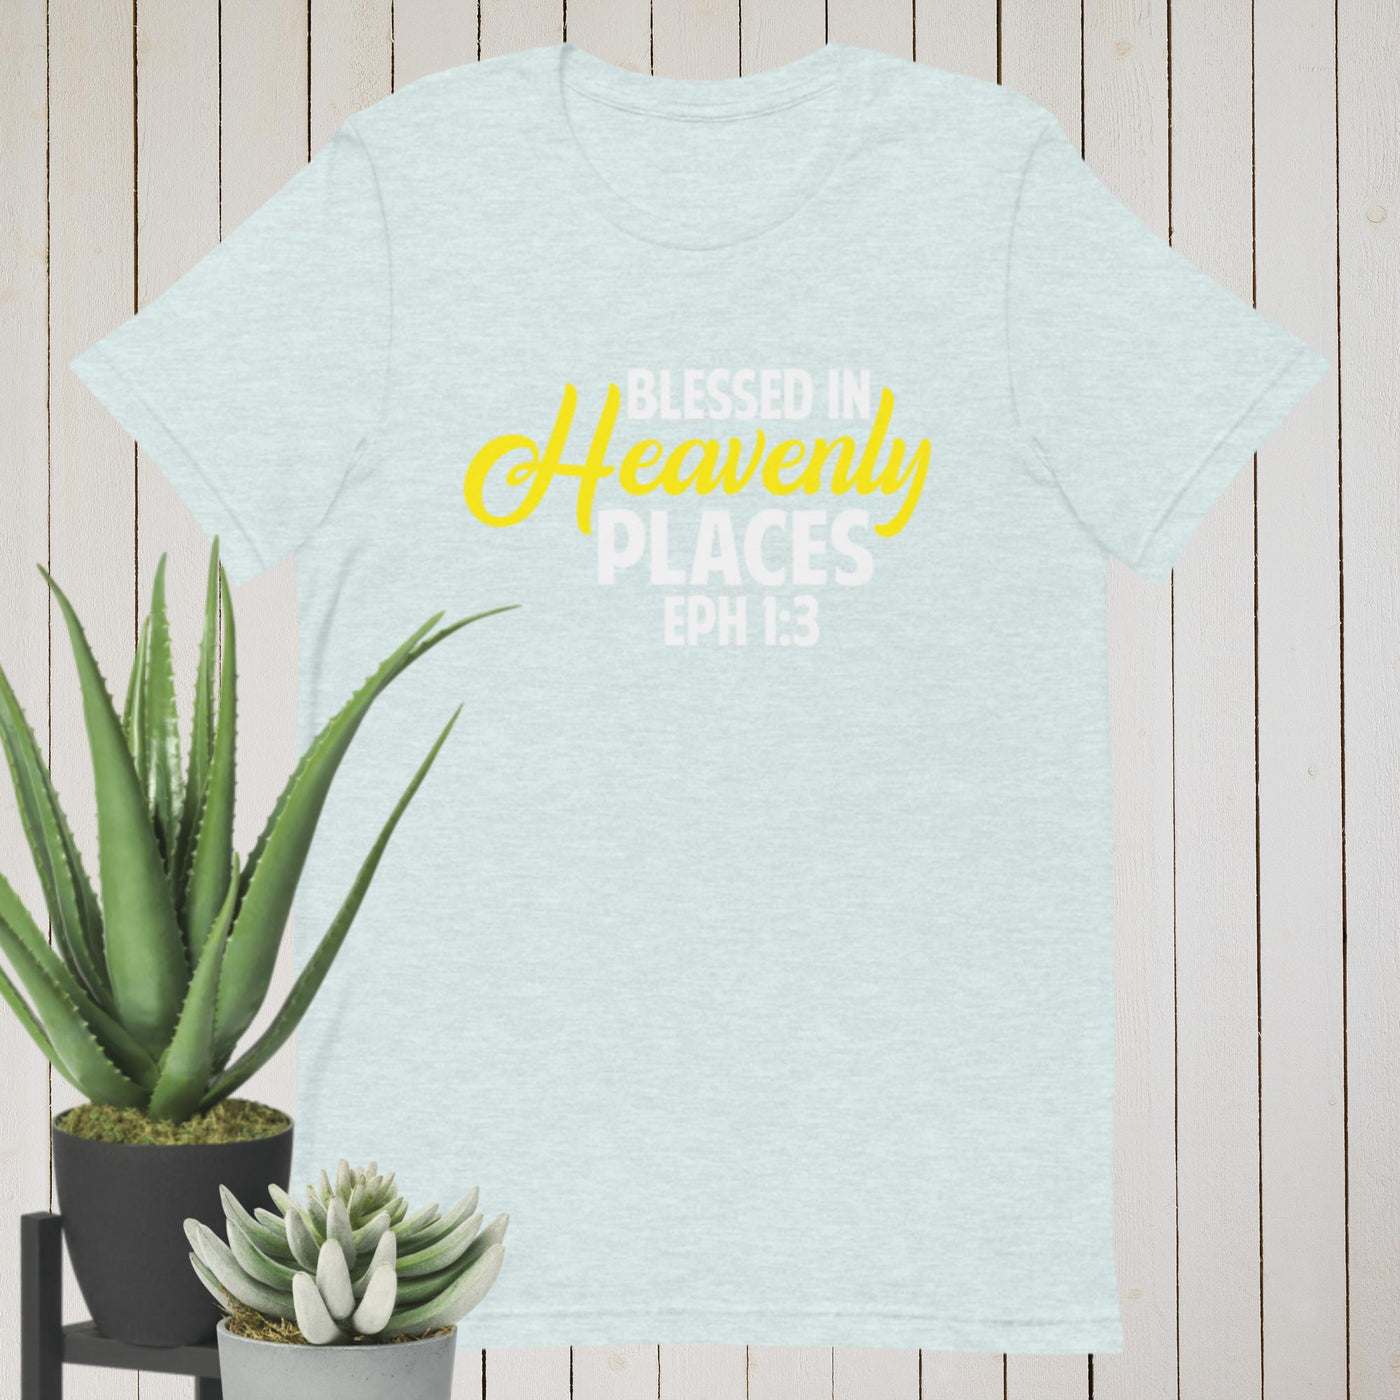 F&H Christian Blessed in Heavenly Places Ephesians 1:3 Womens t-shirt